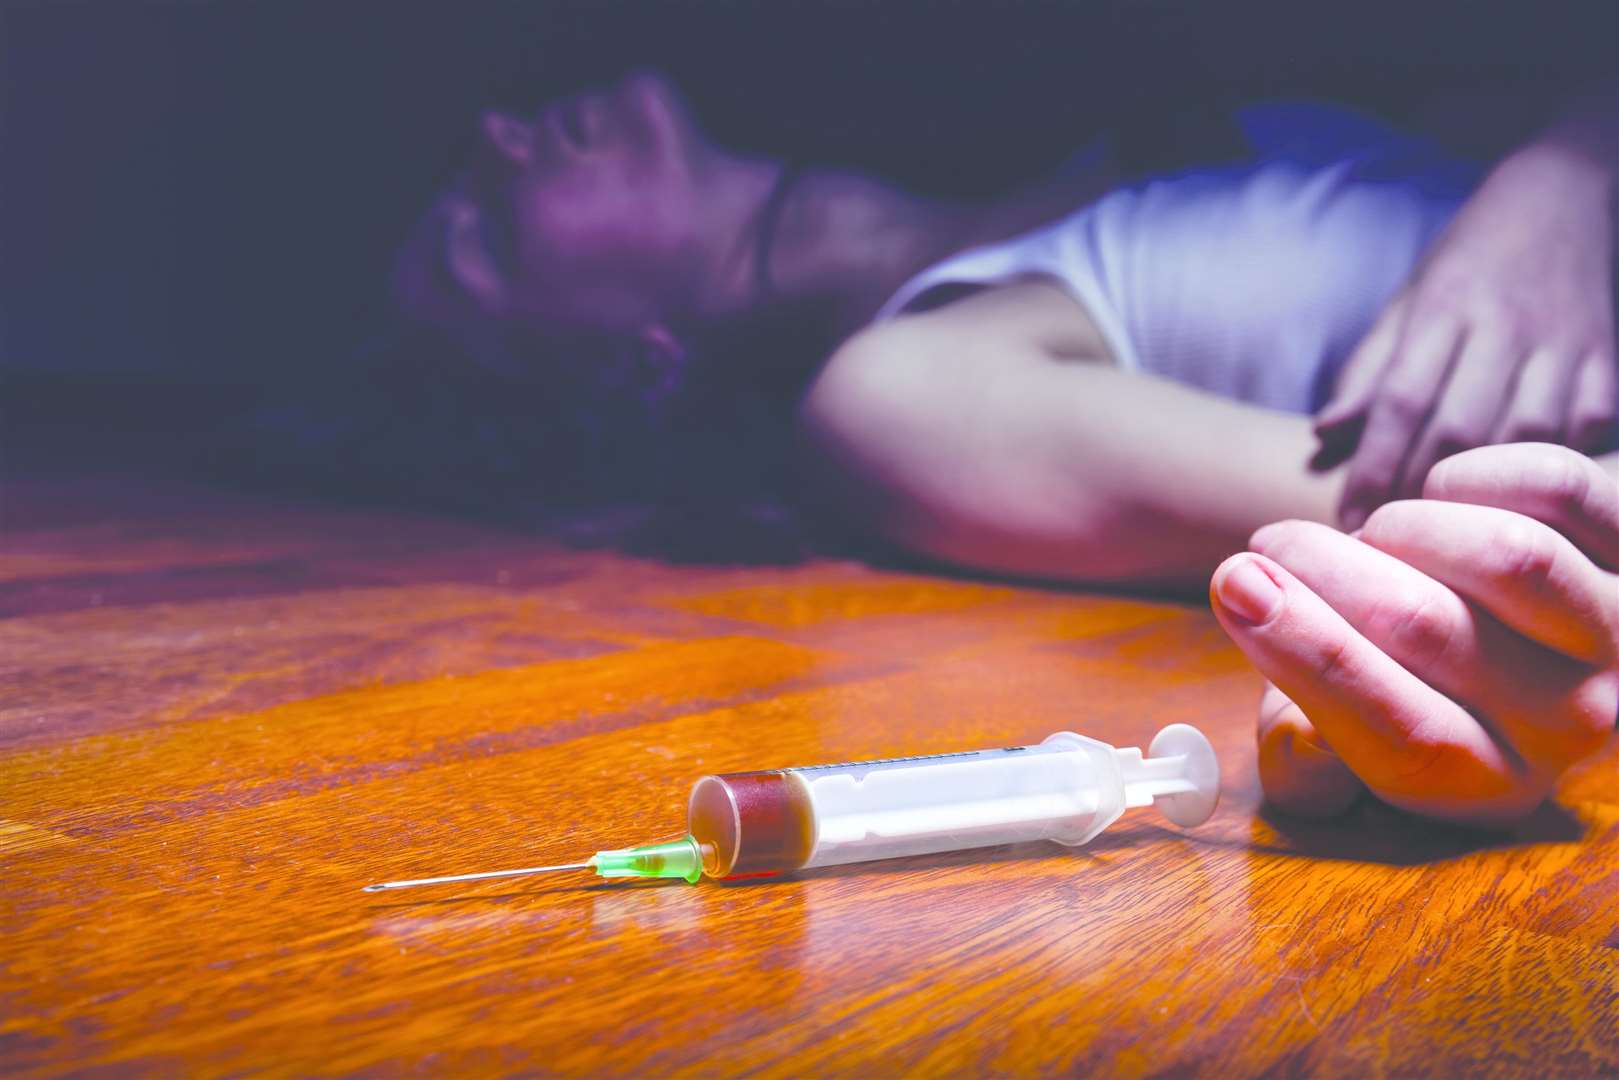 Thanet is one of the worst places in the UK for deaths from heroin and morphine overdoses